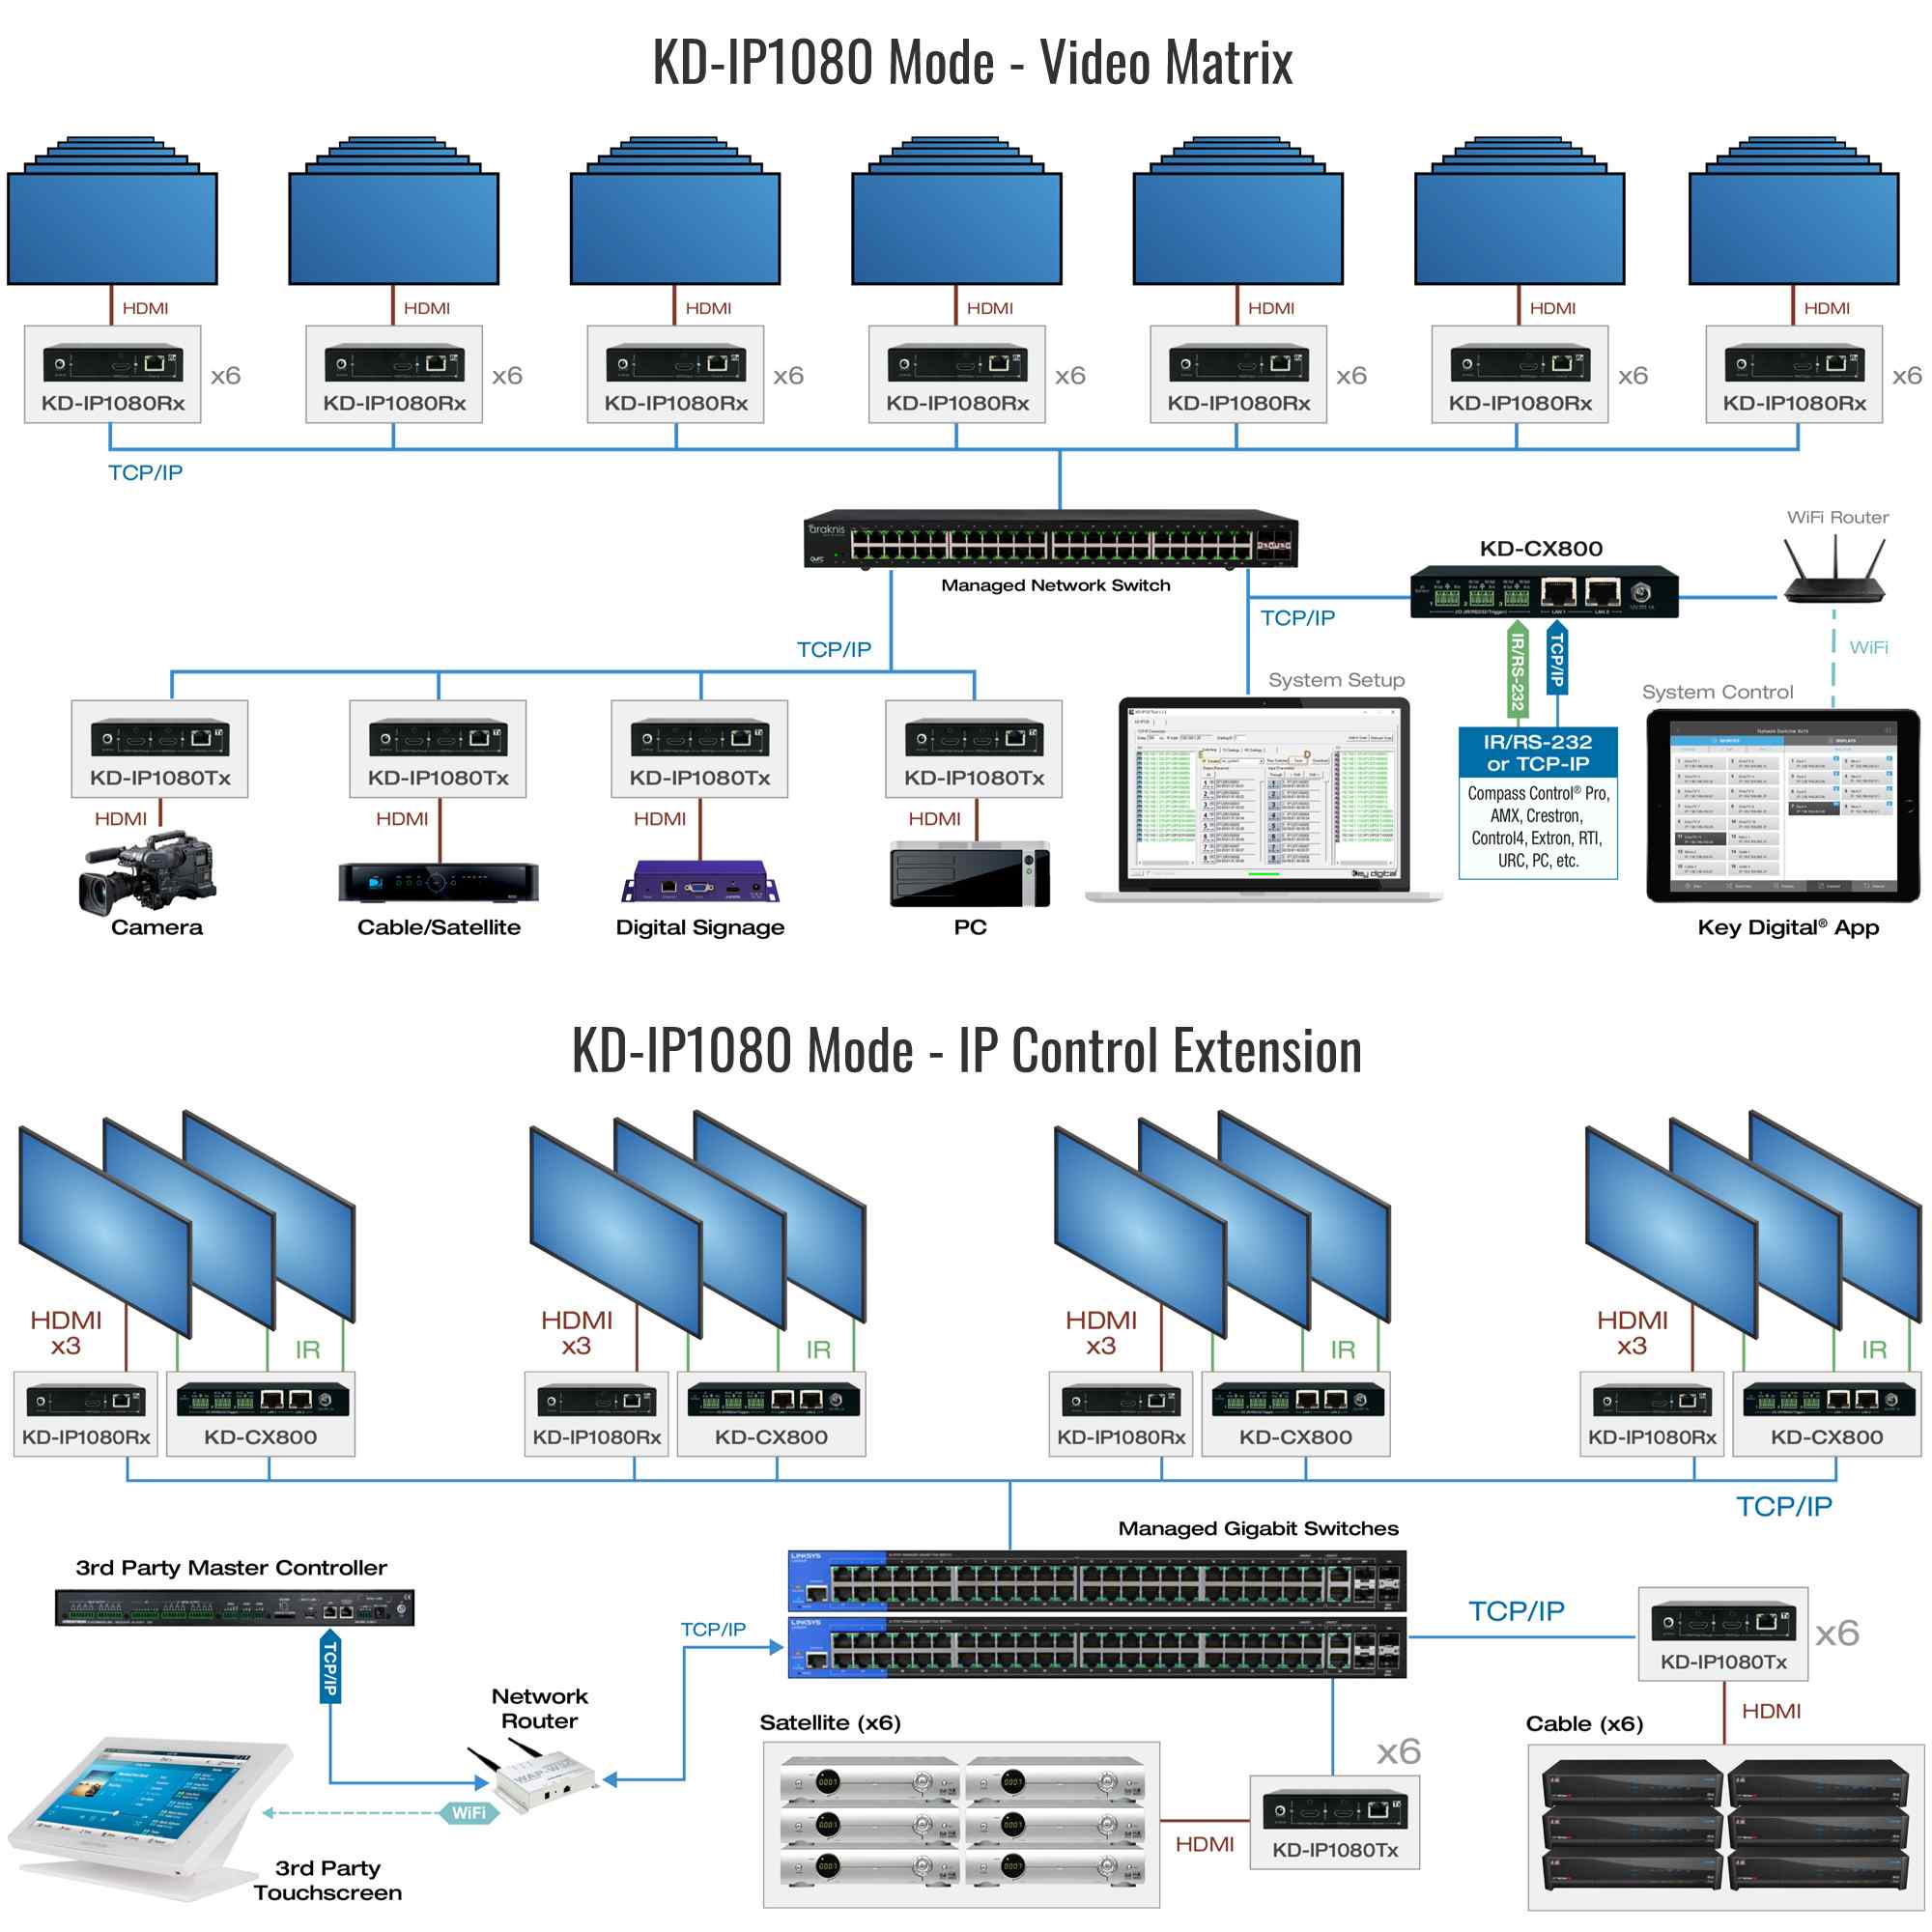 Thumbnail of Example Diagram showing video matrix and IP control extension of HDMI over IP